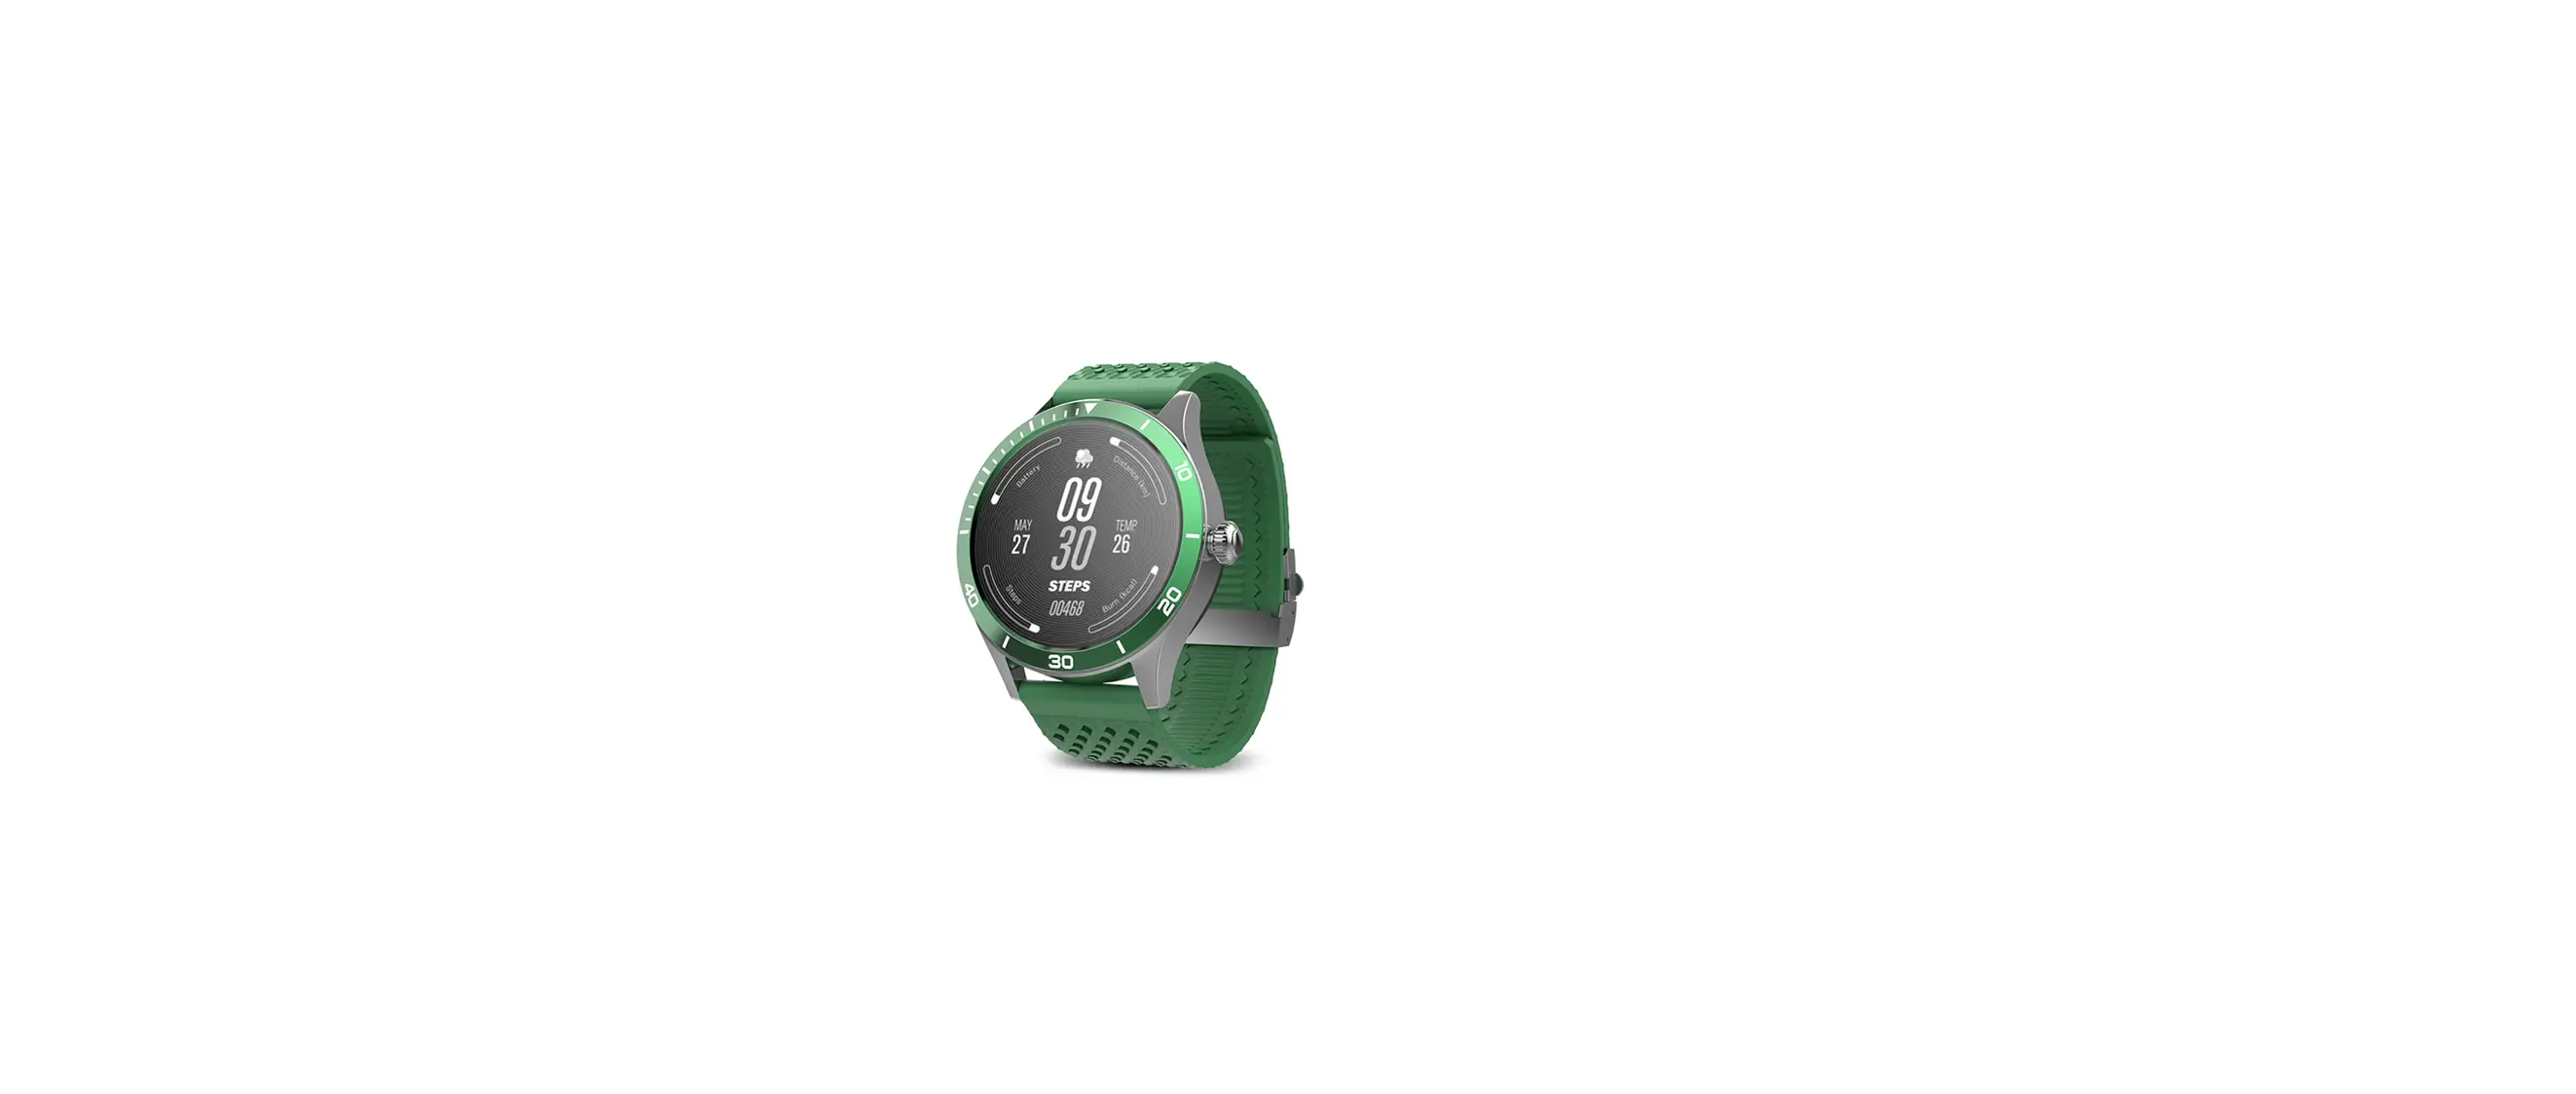 Forever-ICON-2-AW-110-Smartwatch-User-Manual-prduct-im